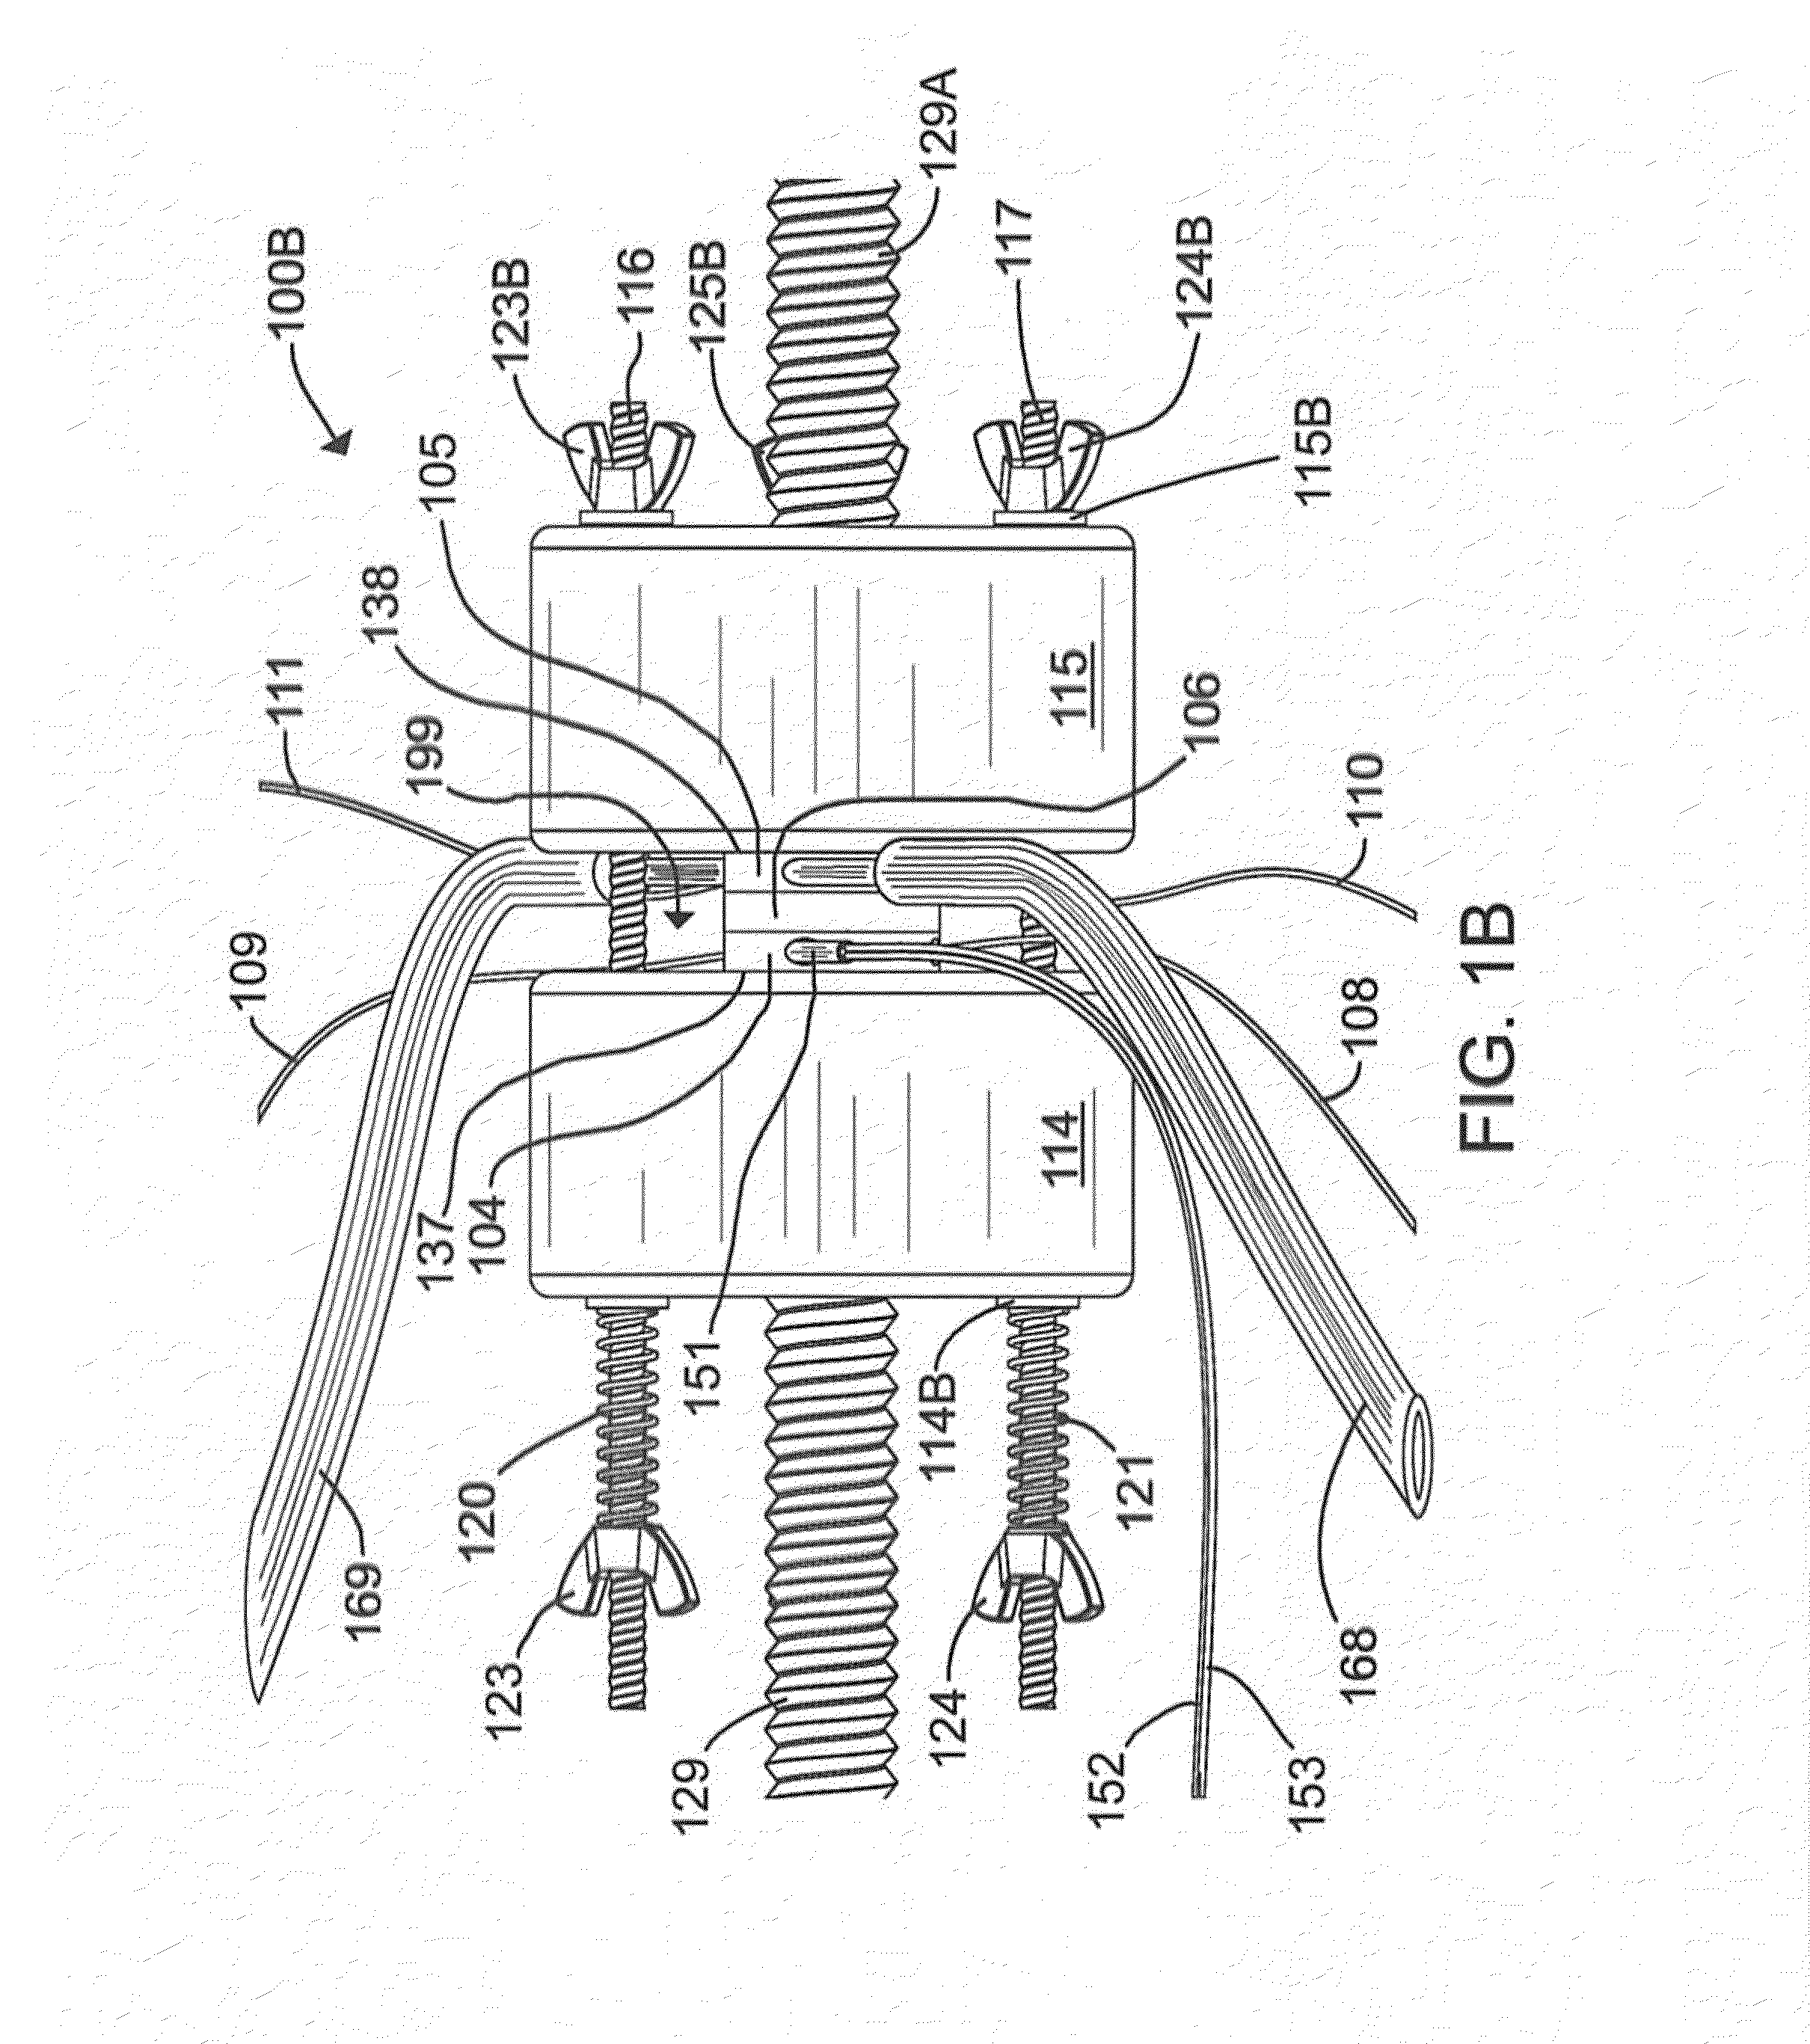 Method and Apparatus for Measuring Thermal Conductivity of Small, Highly Insulating Specimens